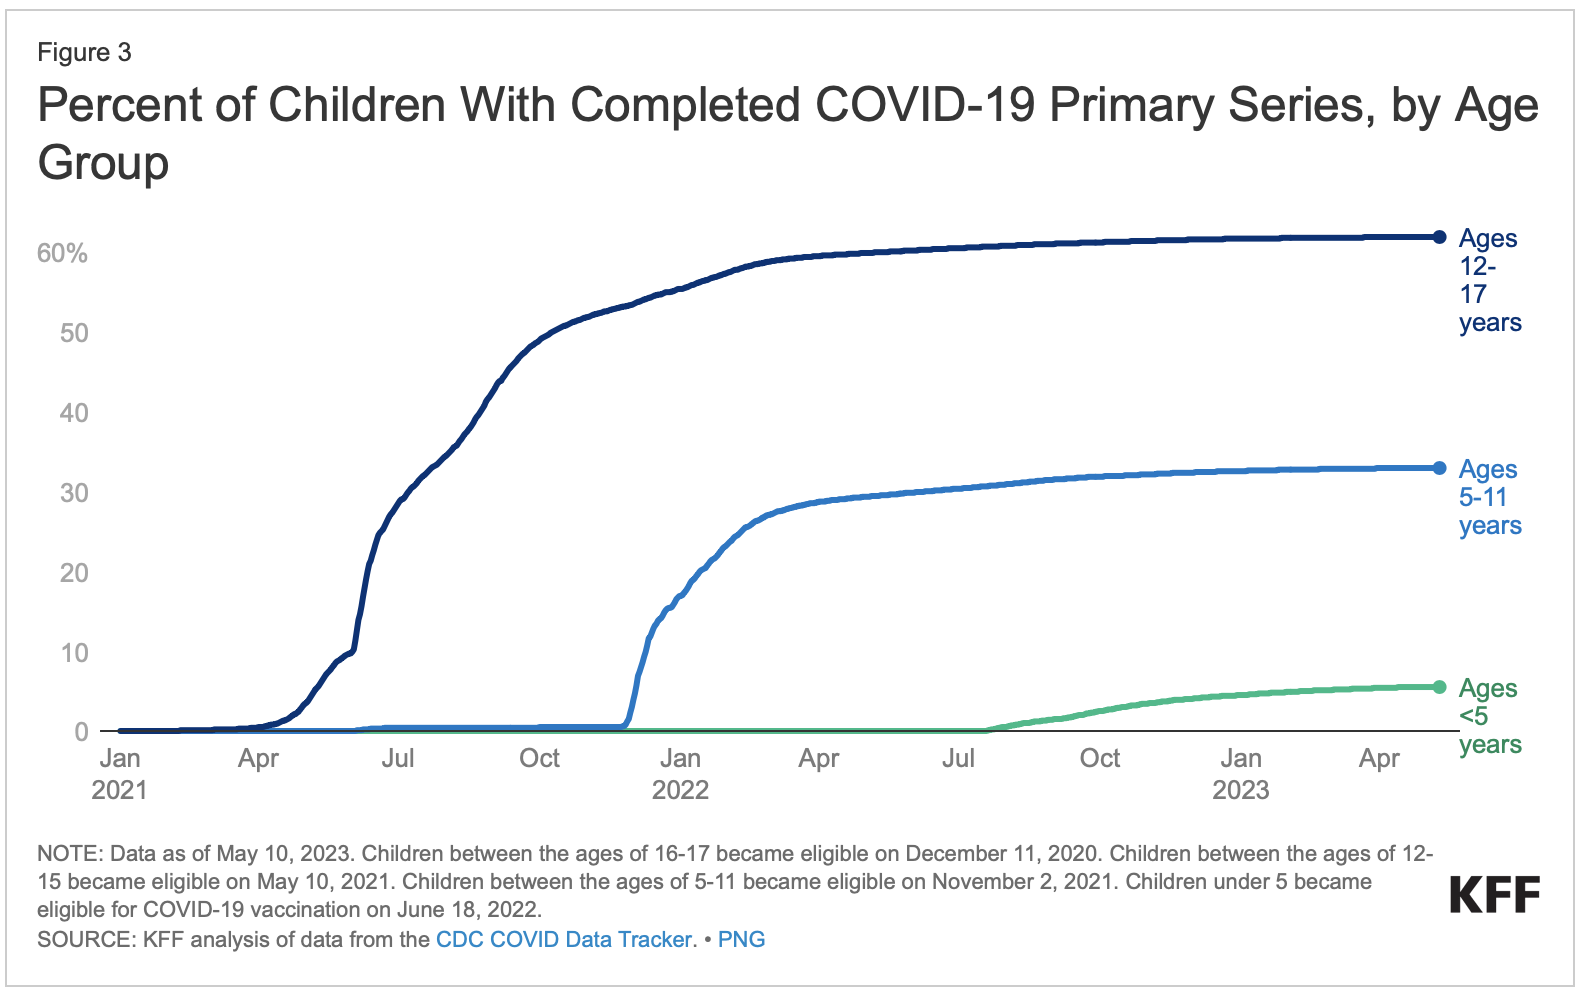 Percent of Children With Completed COVID-19 Primary Series, by Age Group - KFF